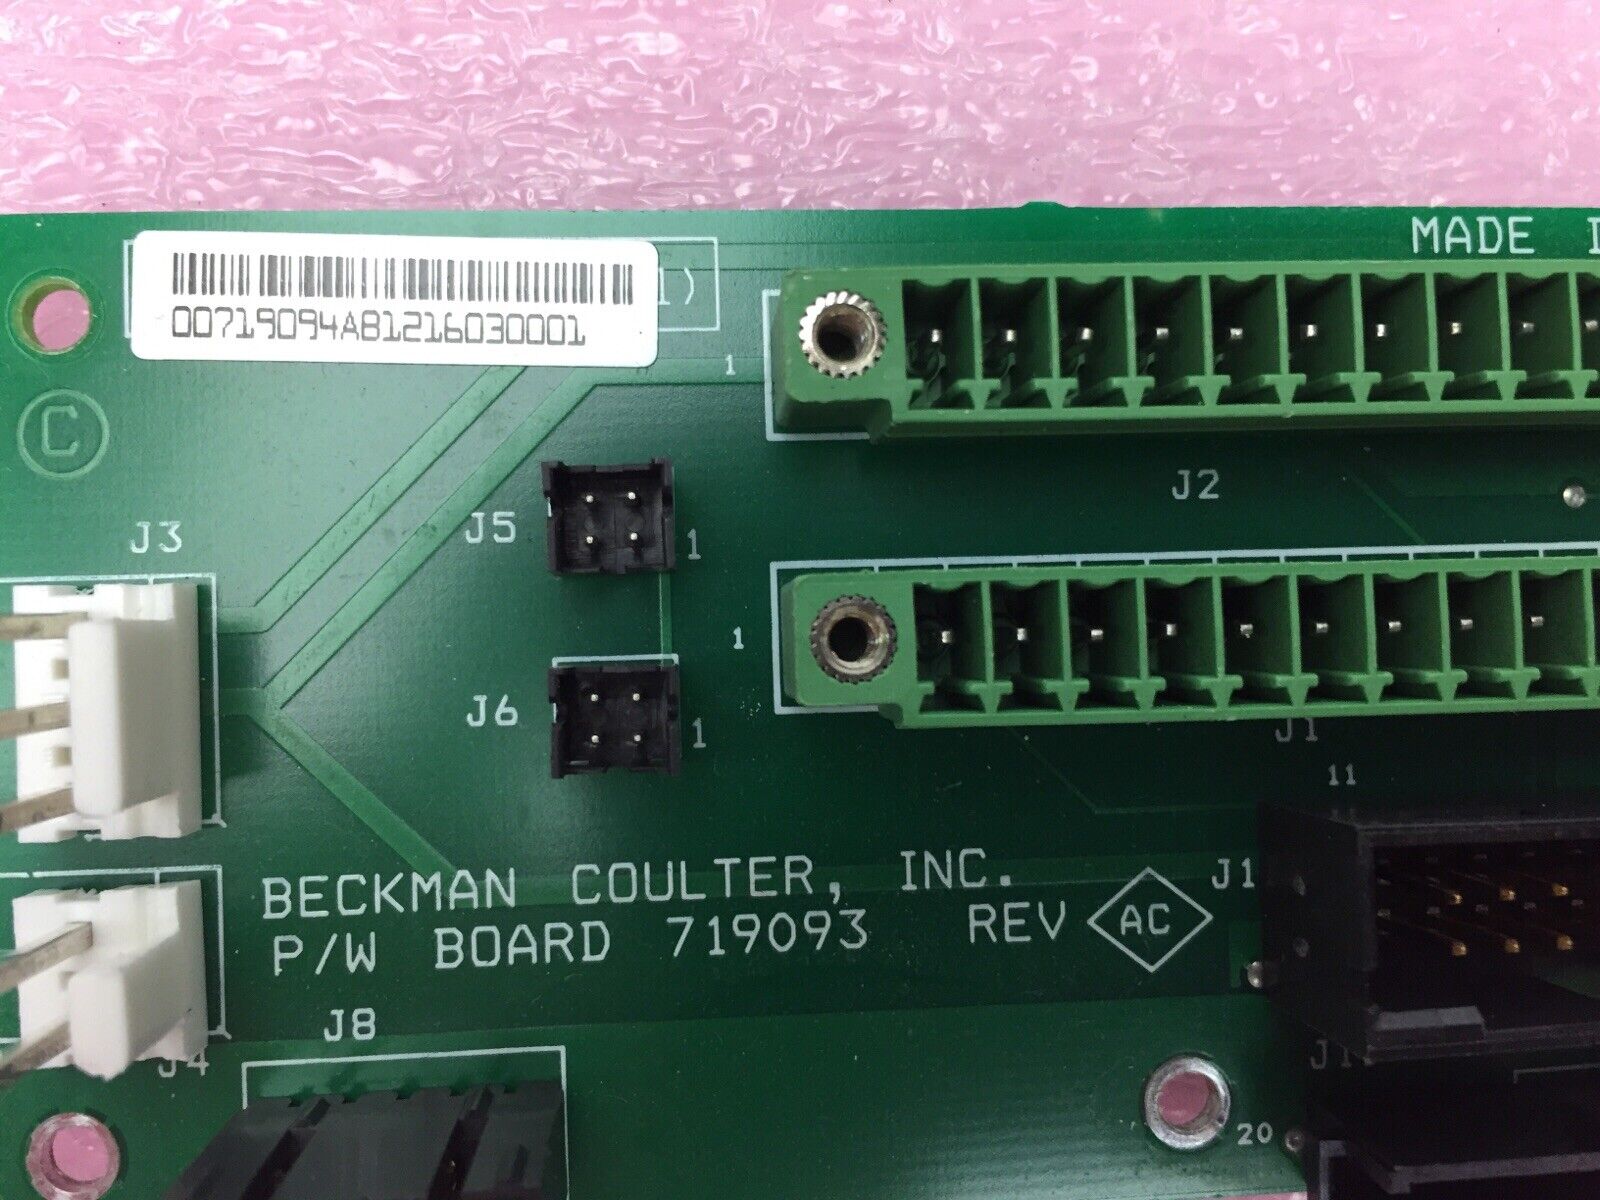 Beckman Coulter 719093 - P/W Board  - Rev. AC - Replacement Part